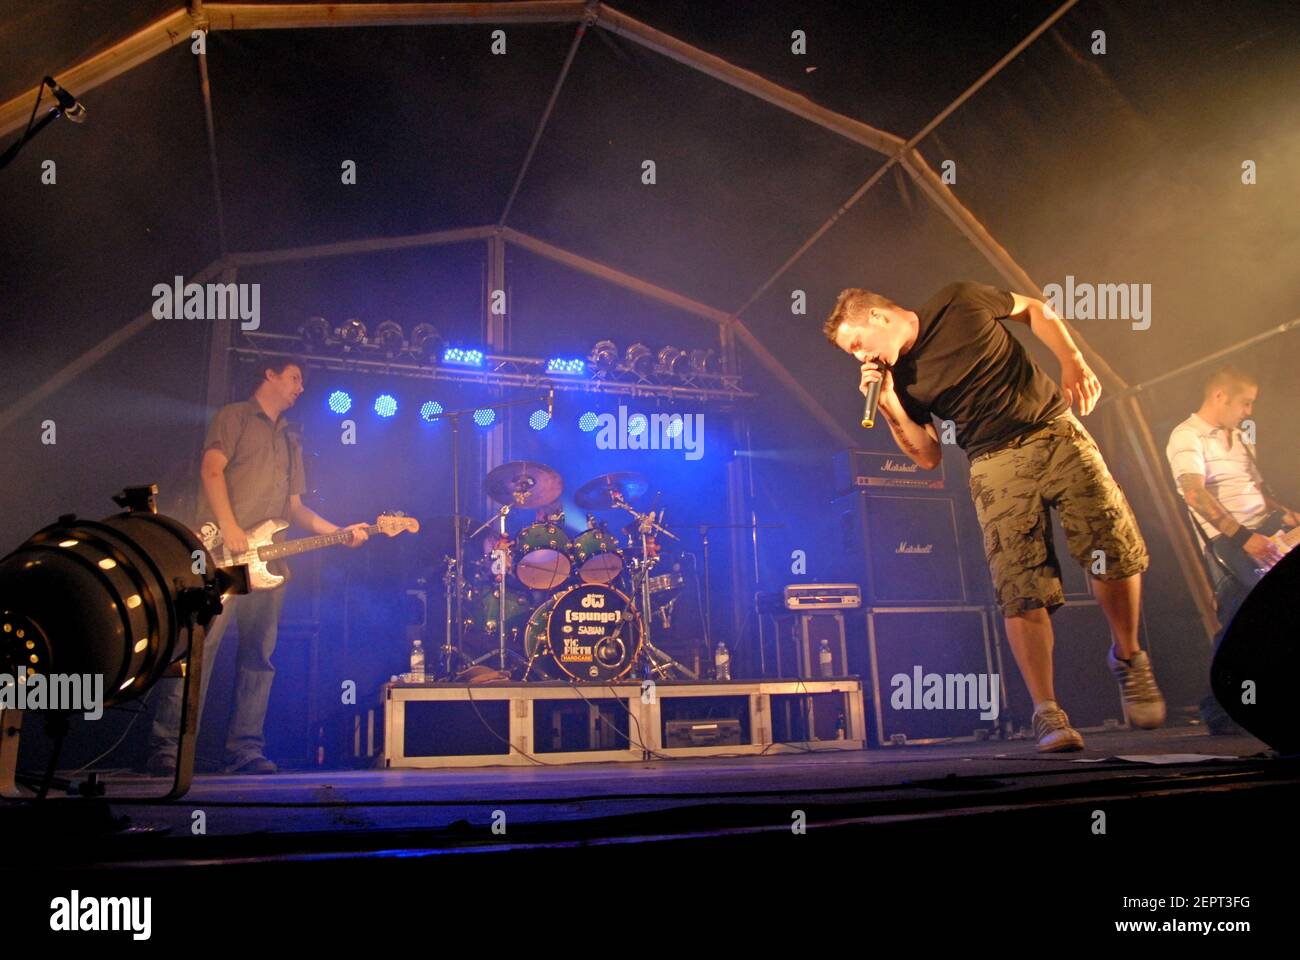 Tewkesbury Ska-punk bank Spunge with lead singer Alex Copeland perform on stage at the 'Over The Rainbow' festival at Tewkesbury Abbey, exactly a year after the devastating floods of 2007 swept through the town. Stock Photo